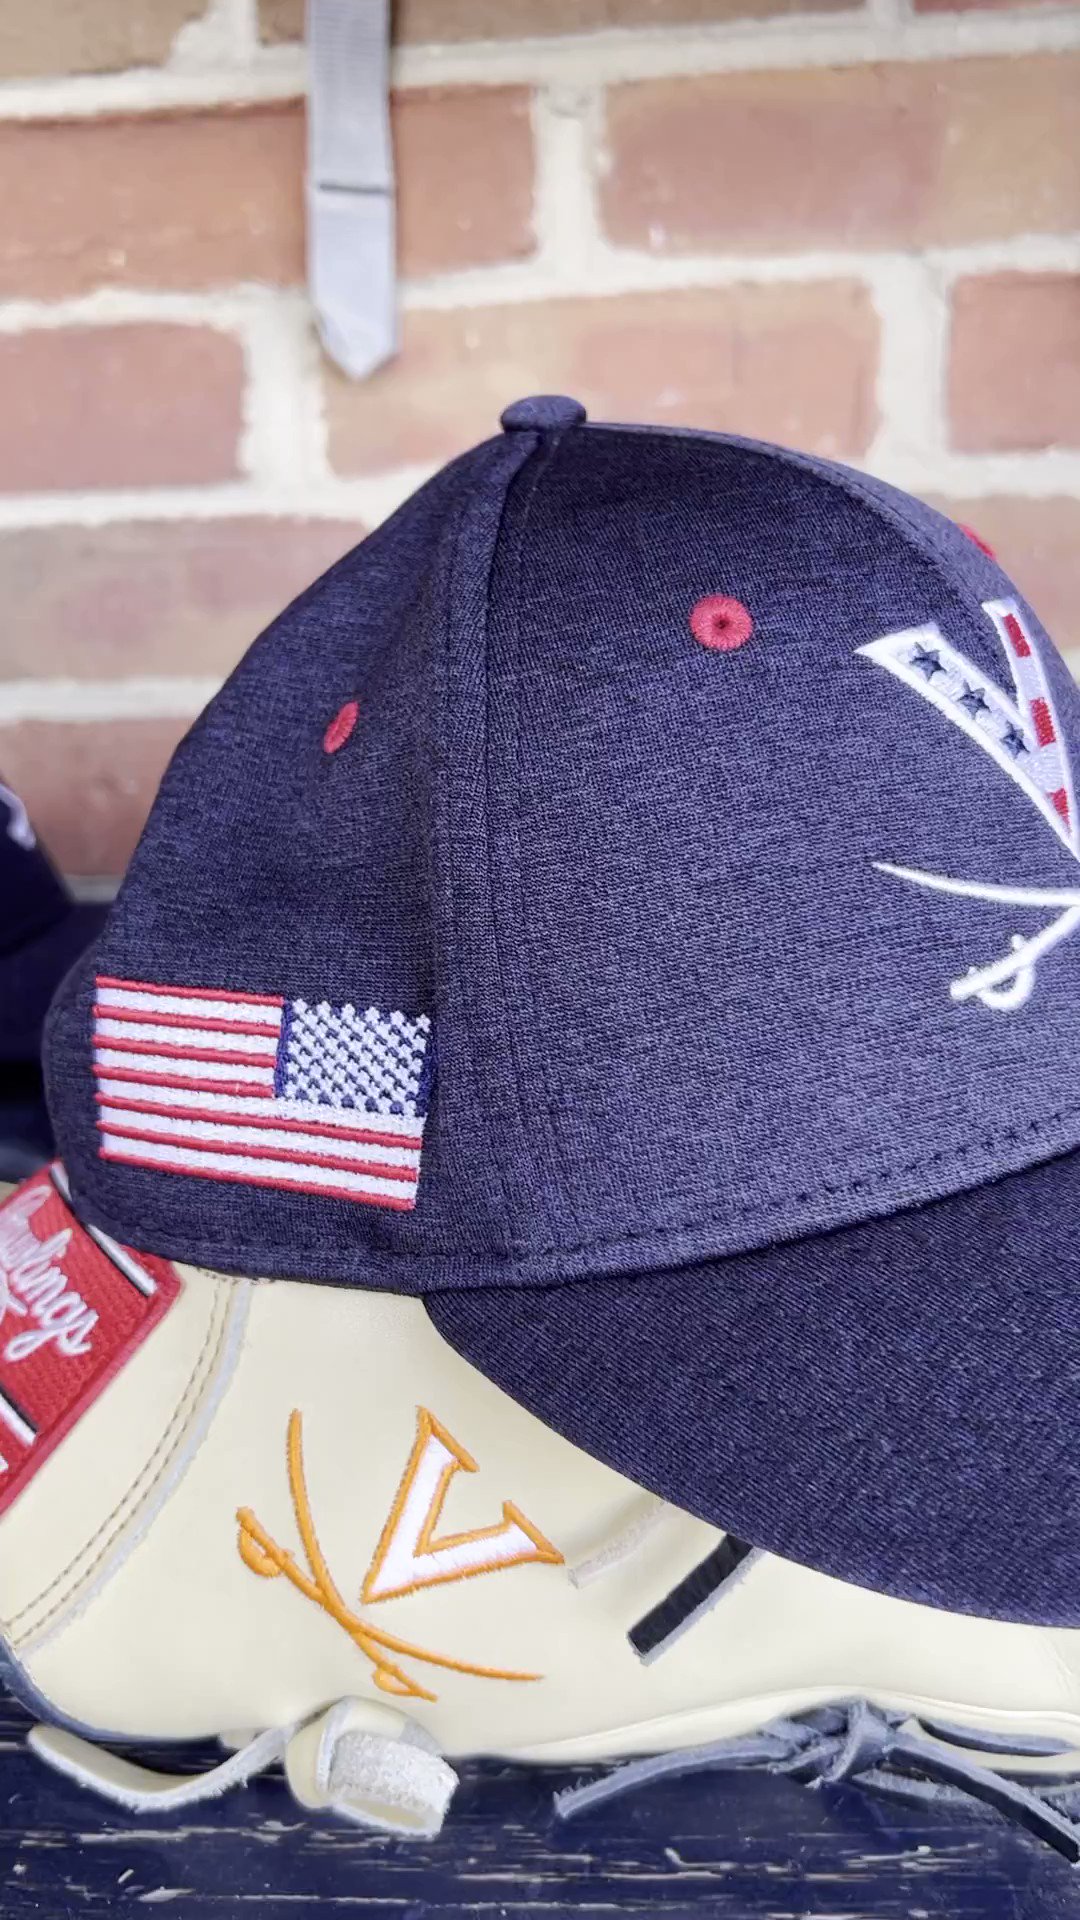 Virginia Baseball on X: 𝘿𝙄𝙎𝙃𝘼𝙍𝙊𝙊𝙉 𝙋𝘼𝙍𝙆 𝙏𝙀𝘼𝙈 𝙎𝙃𝙊𝙋  𝙊𝙉𝙇𝙔! Virginia Red, White and Hoo hats are available for sale at the  team shop behind home plate this weekend! For more 🔴⚪️⚔️ gear